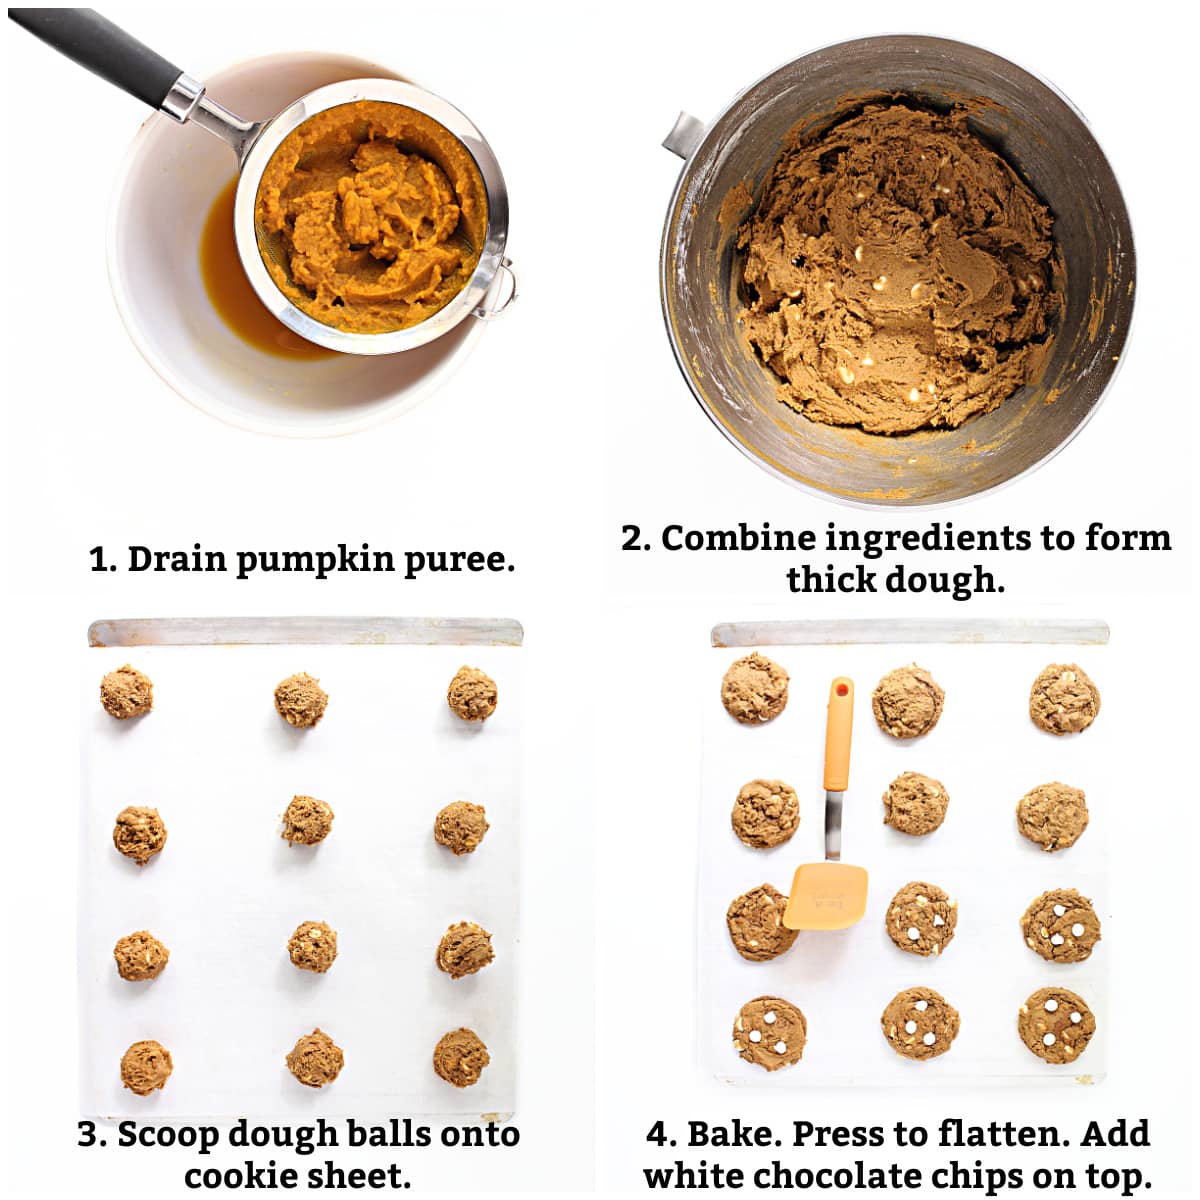 Instructions: drain puree, combine ingredients for dough, scoop dough balls, bake, flatten, add white chocolate chips.